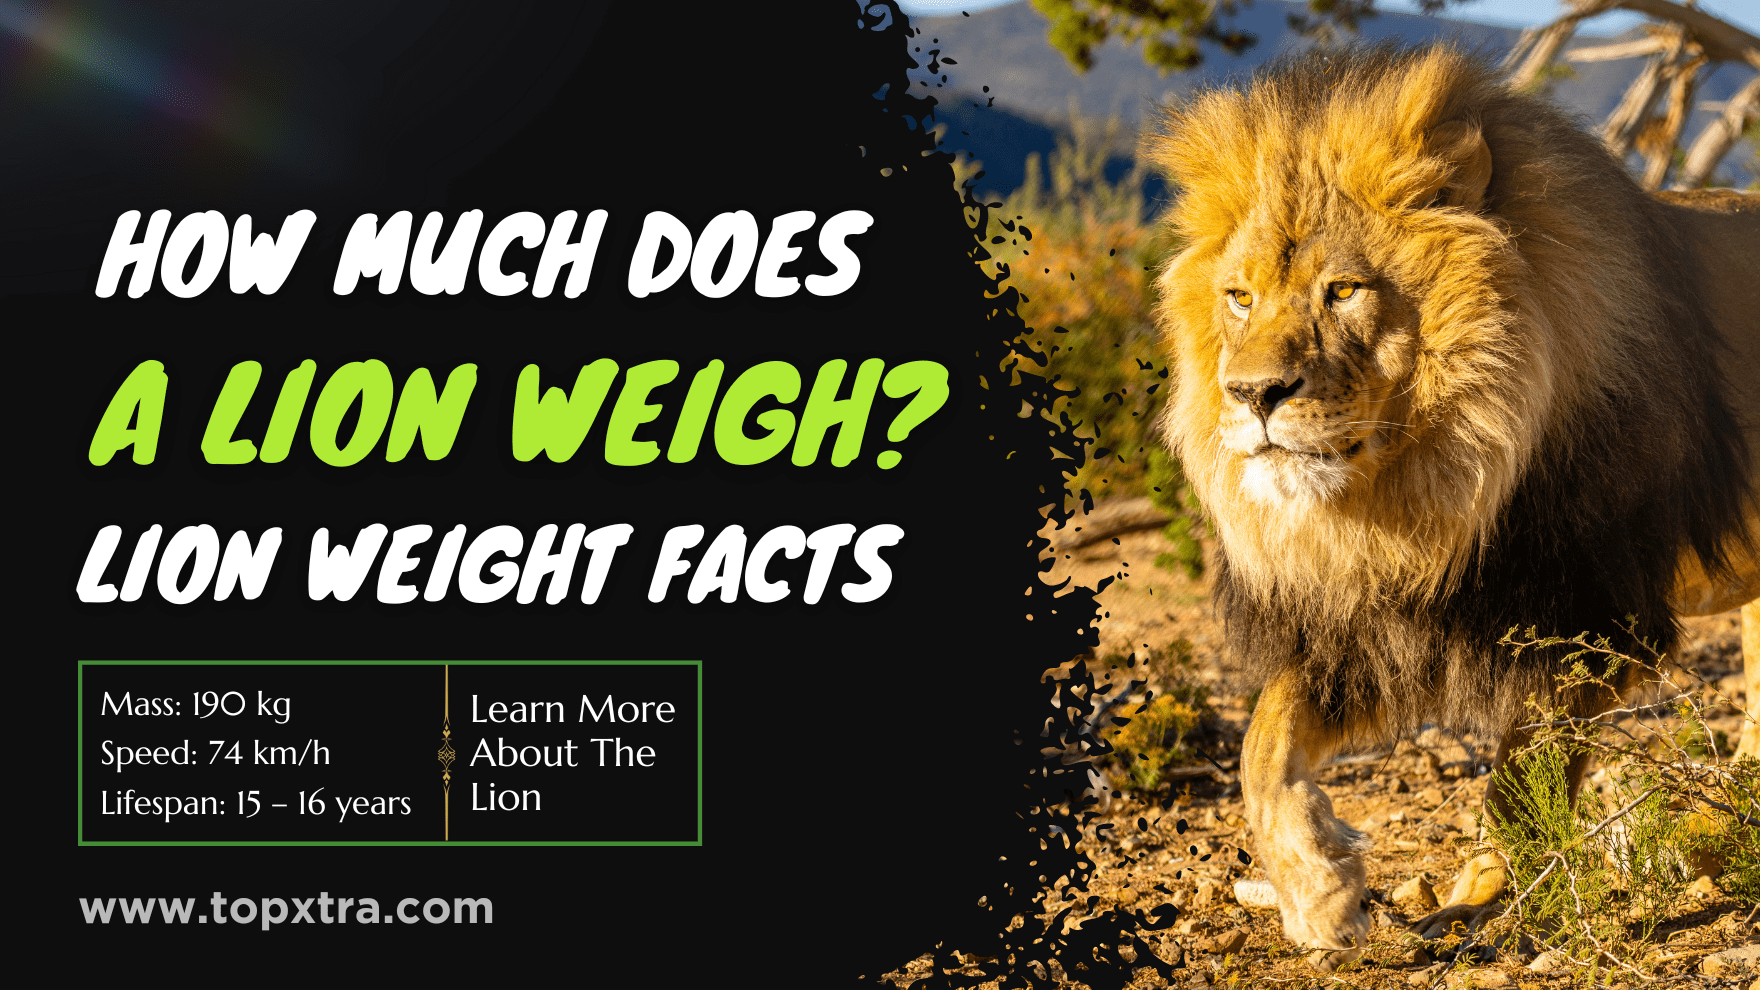 How Much Does a Lion Weigh | Lion Weight Facts